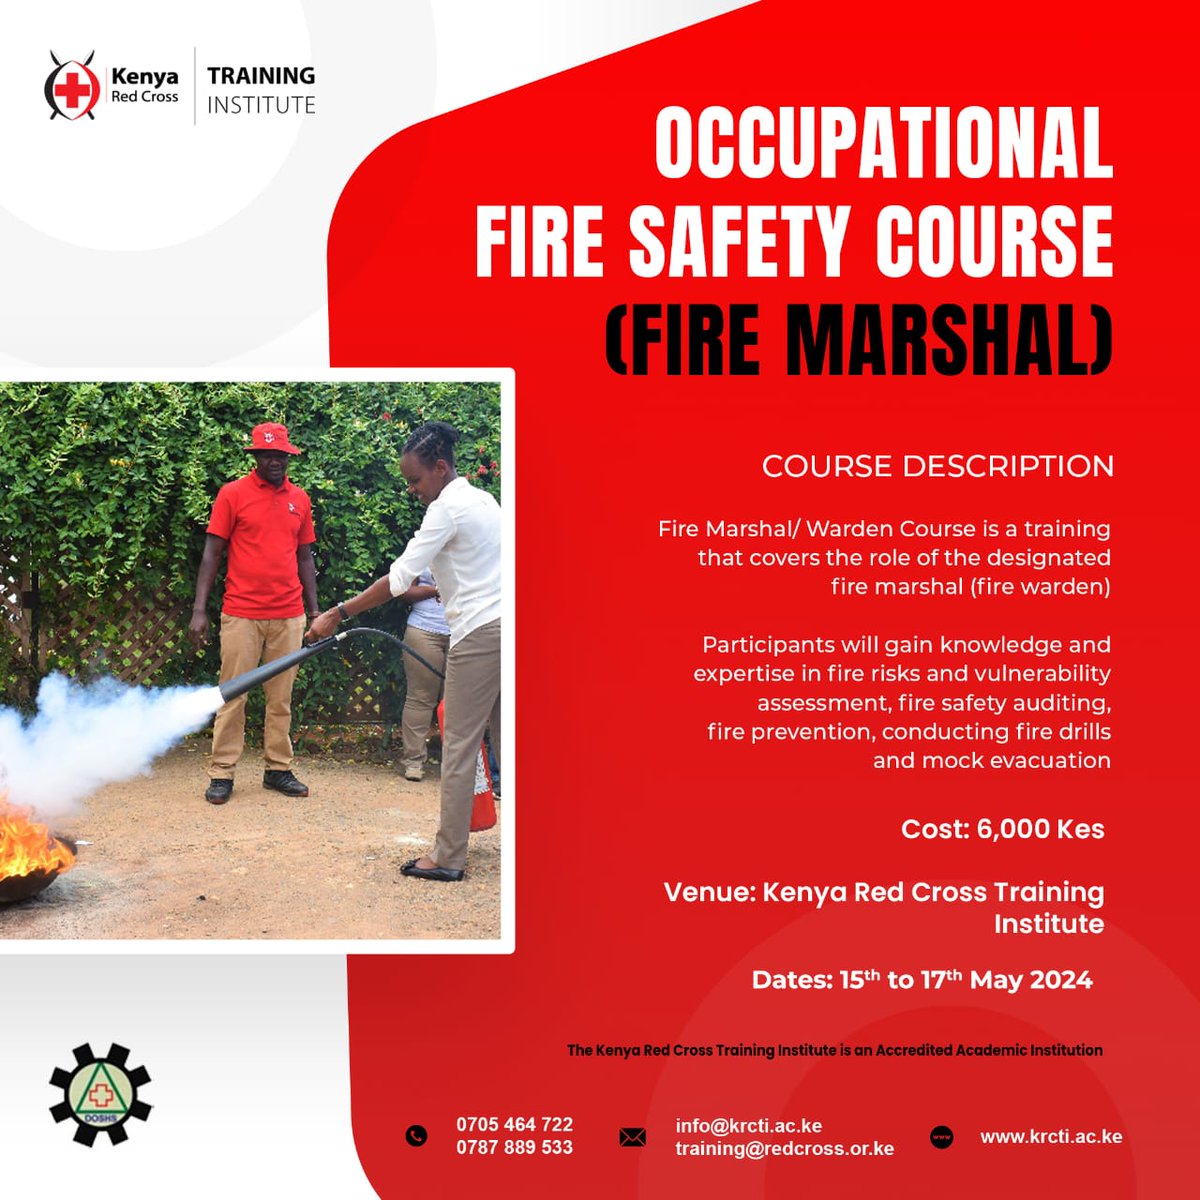 Are you aspiring to be a #FireMarshal/Warden? Join us from the 15th - 17th May 2024, and gain knowledge and expertise in #firerisks and vulnerability assessment, #firesafety auditing, #fireprevention, conducting #firedrills, mock #evacuation and much more.